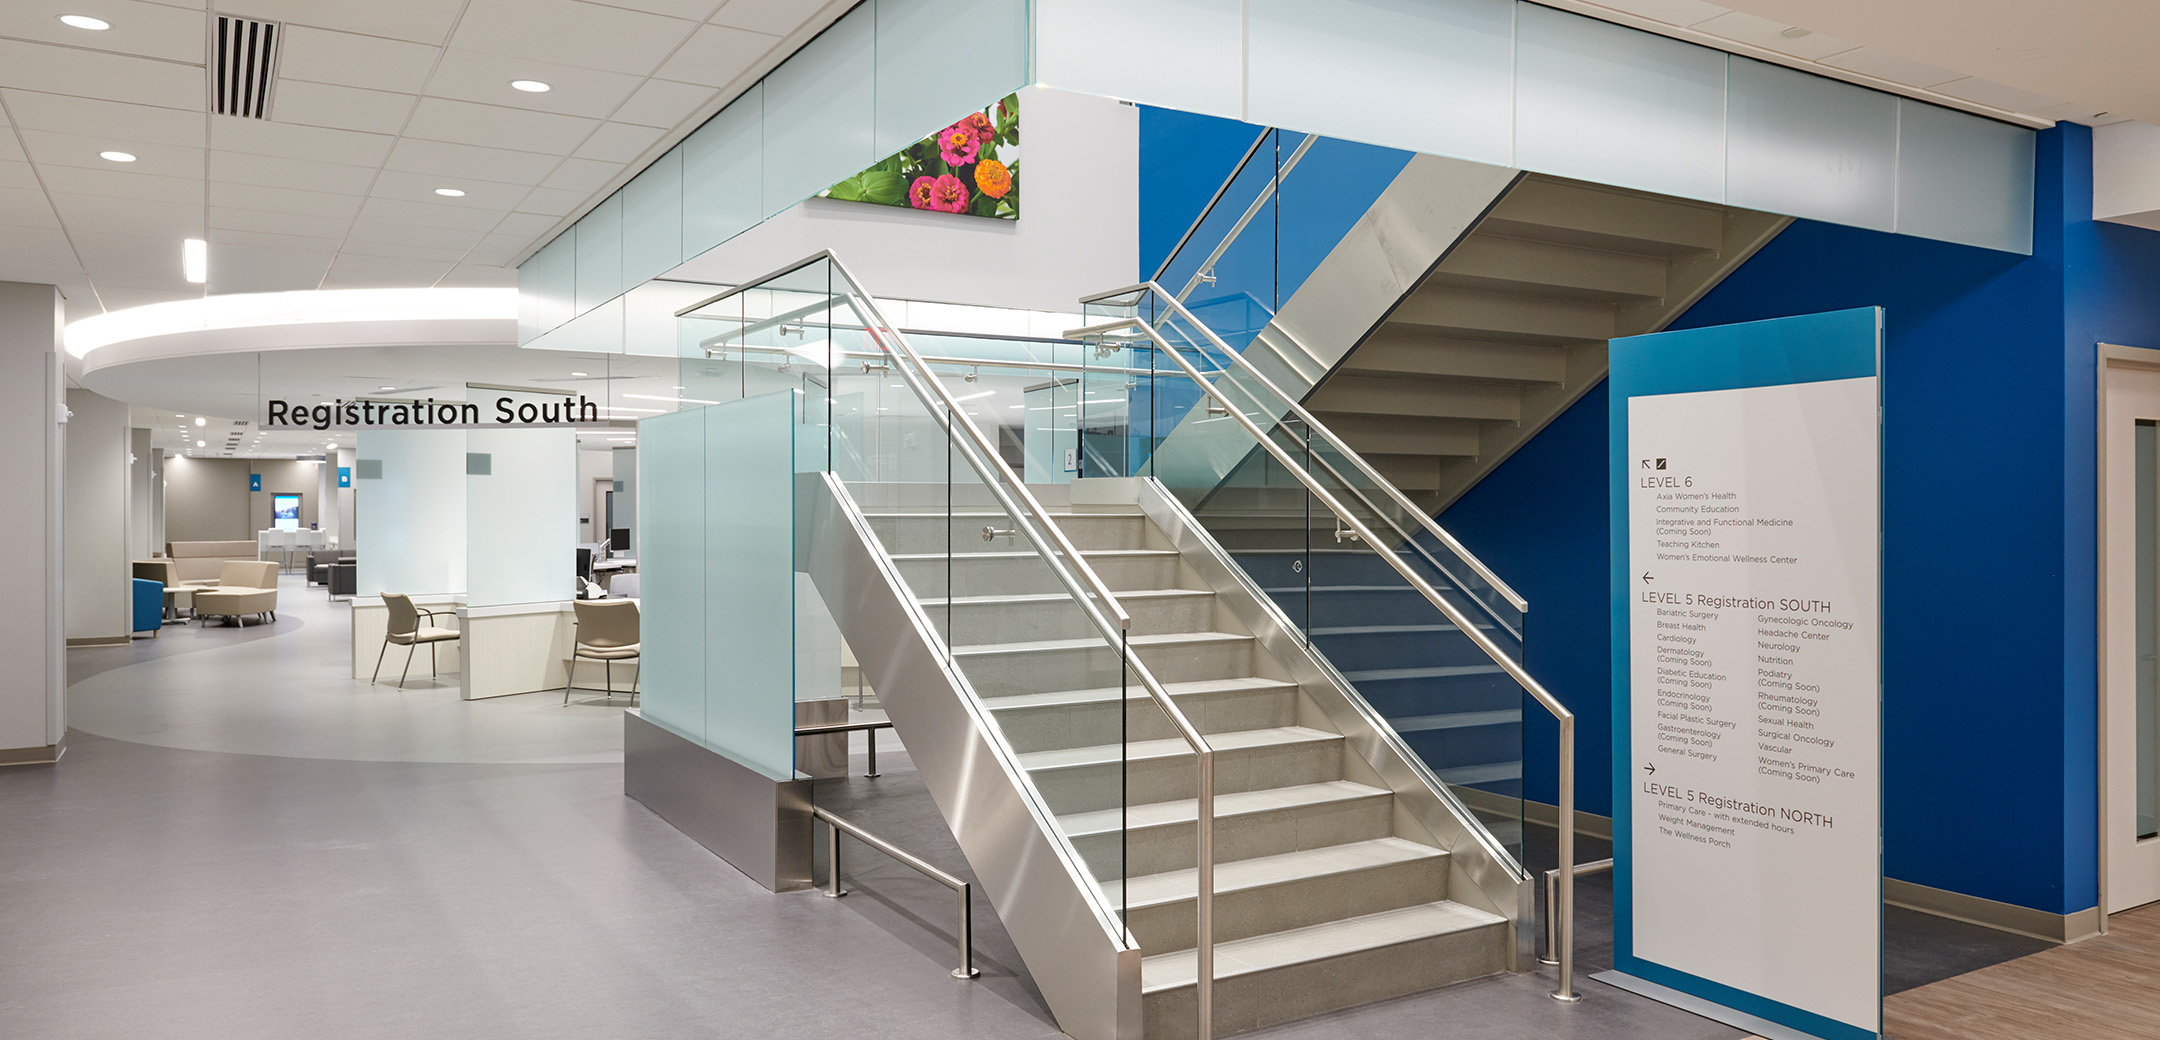 An interior view of the Main Health Women's Health Center building showcasing the registration area lobby and upwards going staircase with glass railings.